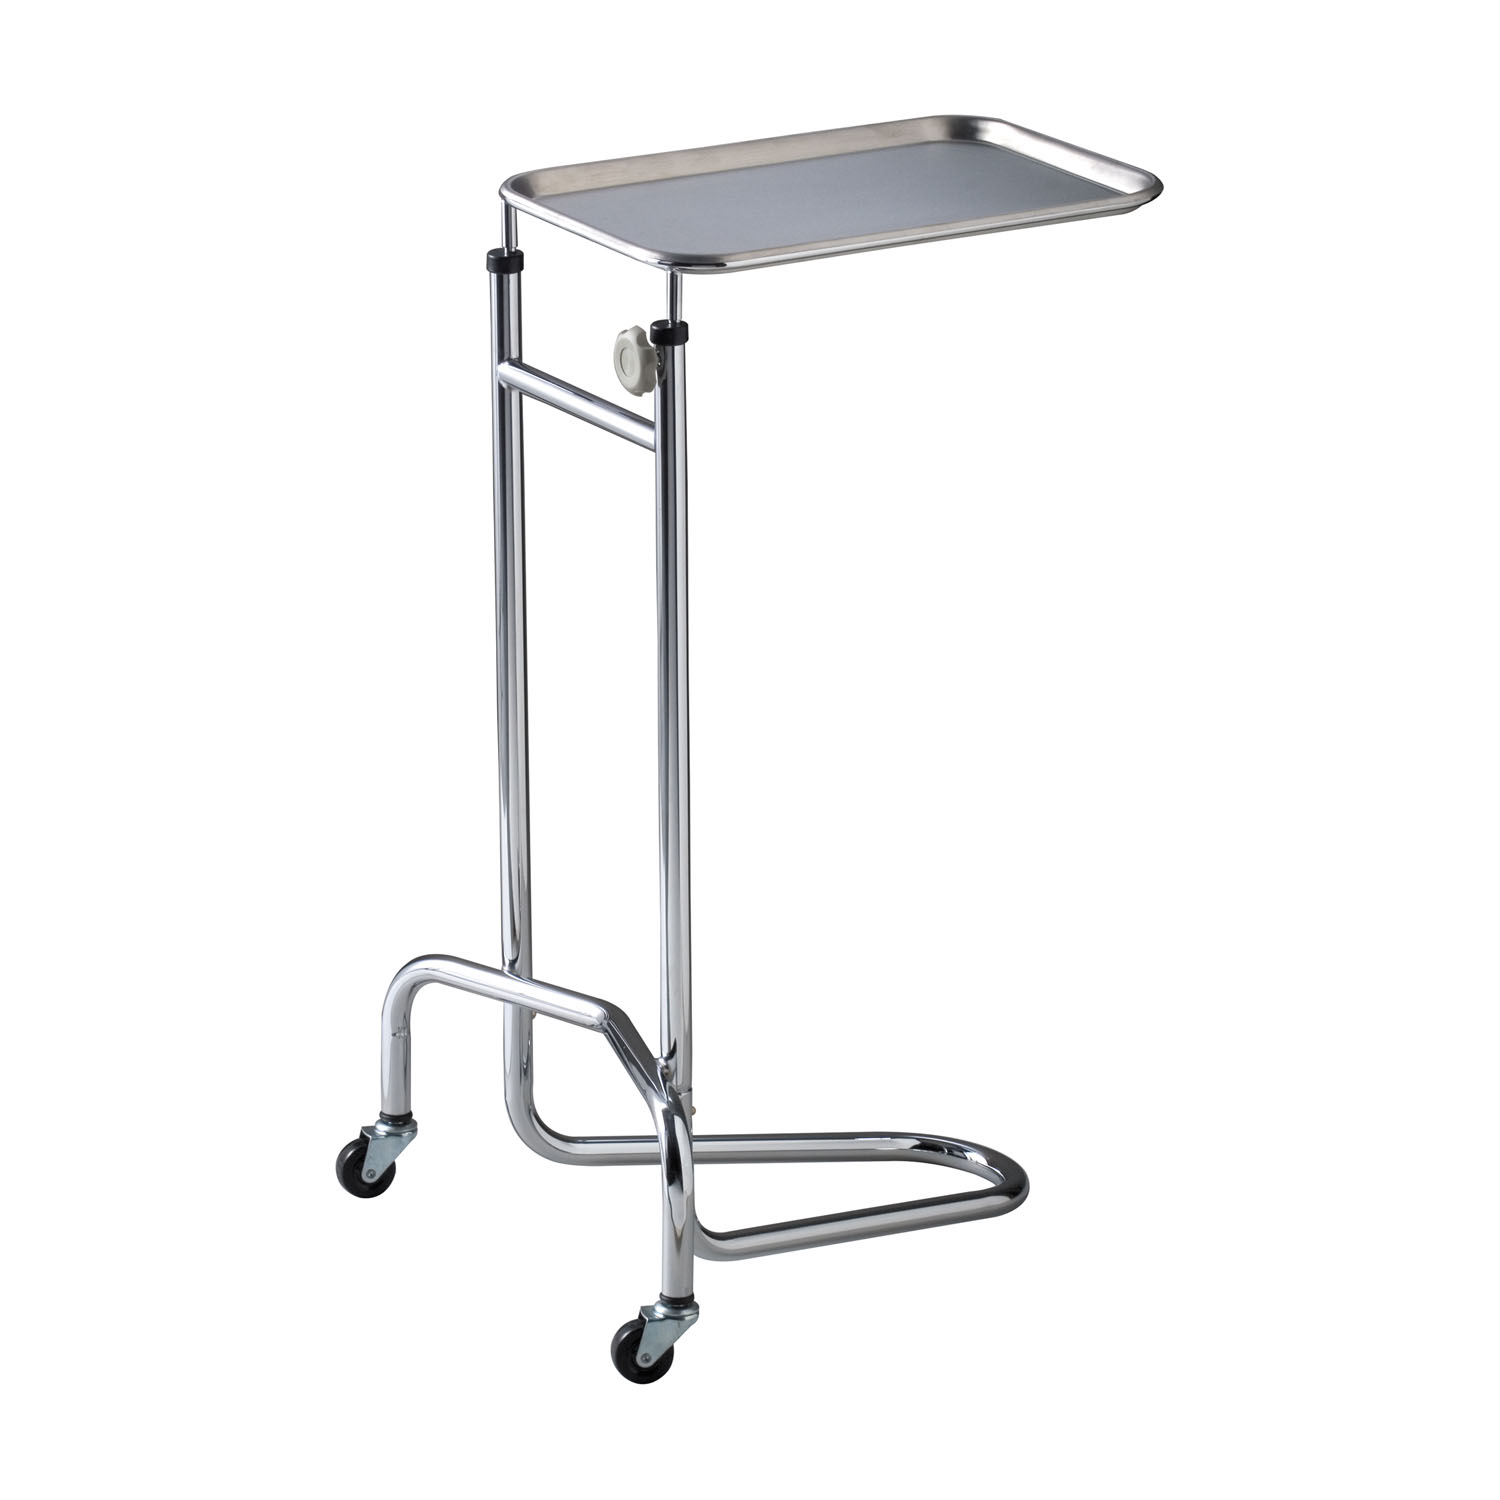 DUKAL TECH-MED MAYO STAND : 4368 EA $130.96 Stocked